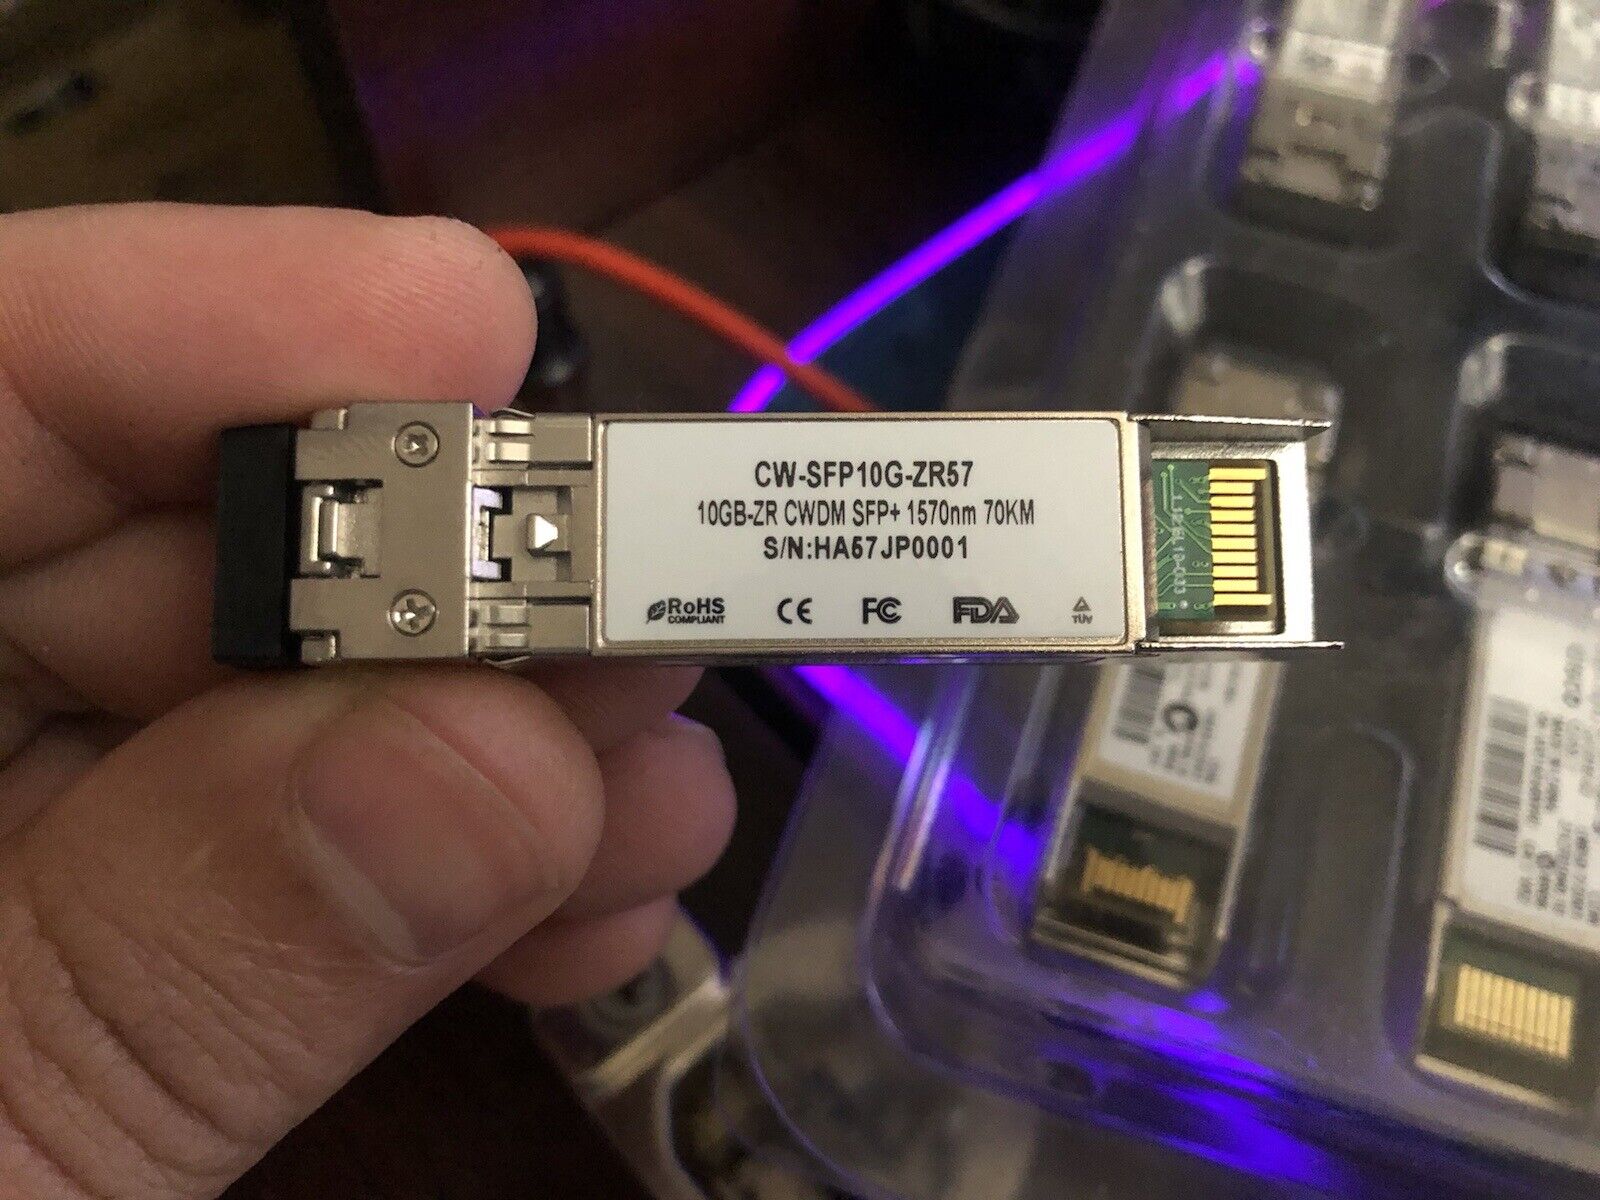 CWDM SFP+ 10G 1570nm 70KM. (EXTREMELY GOOD CONDITION)